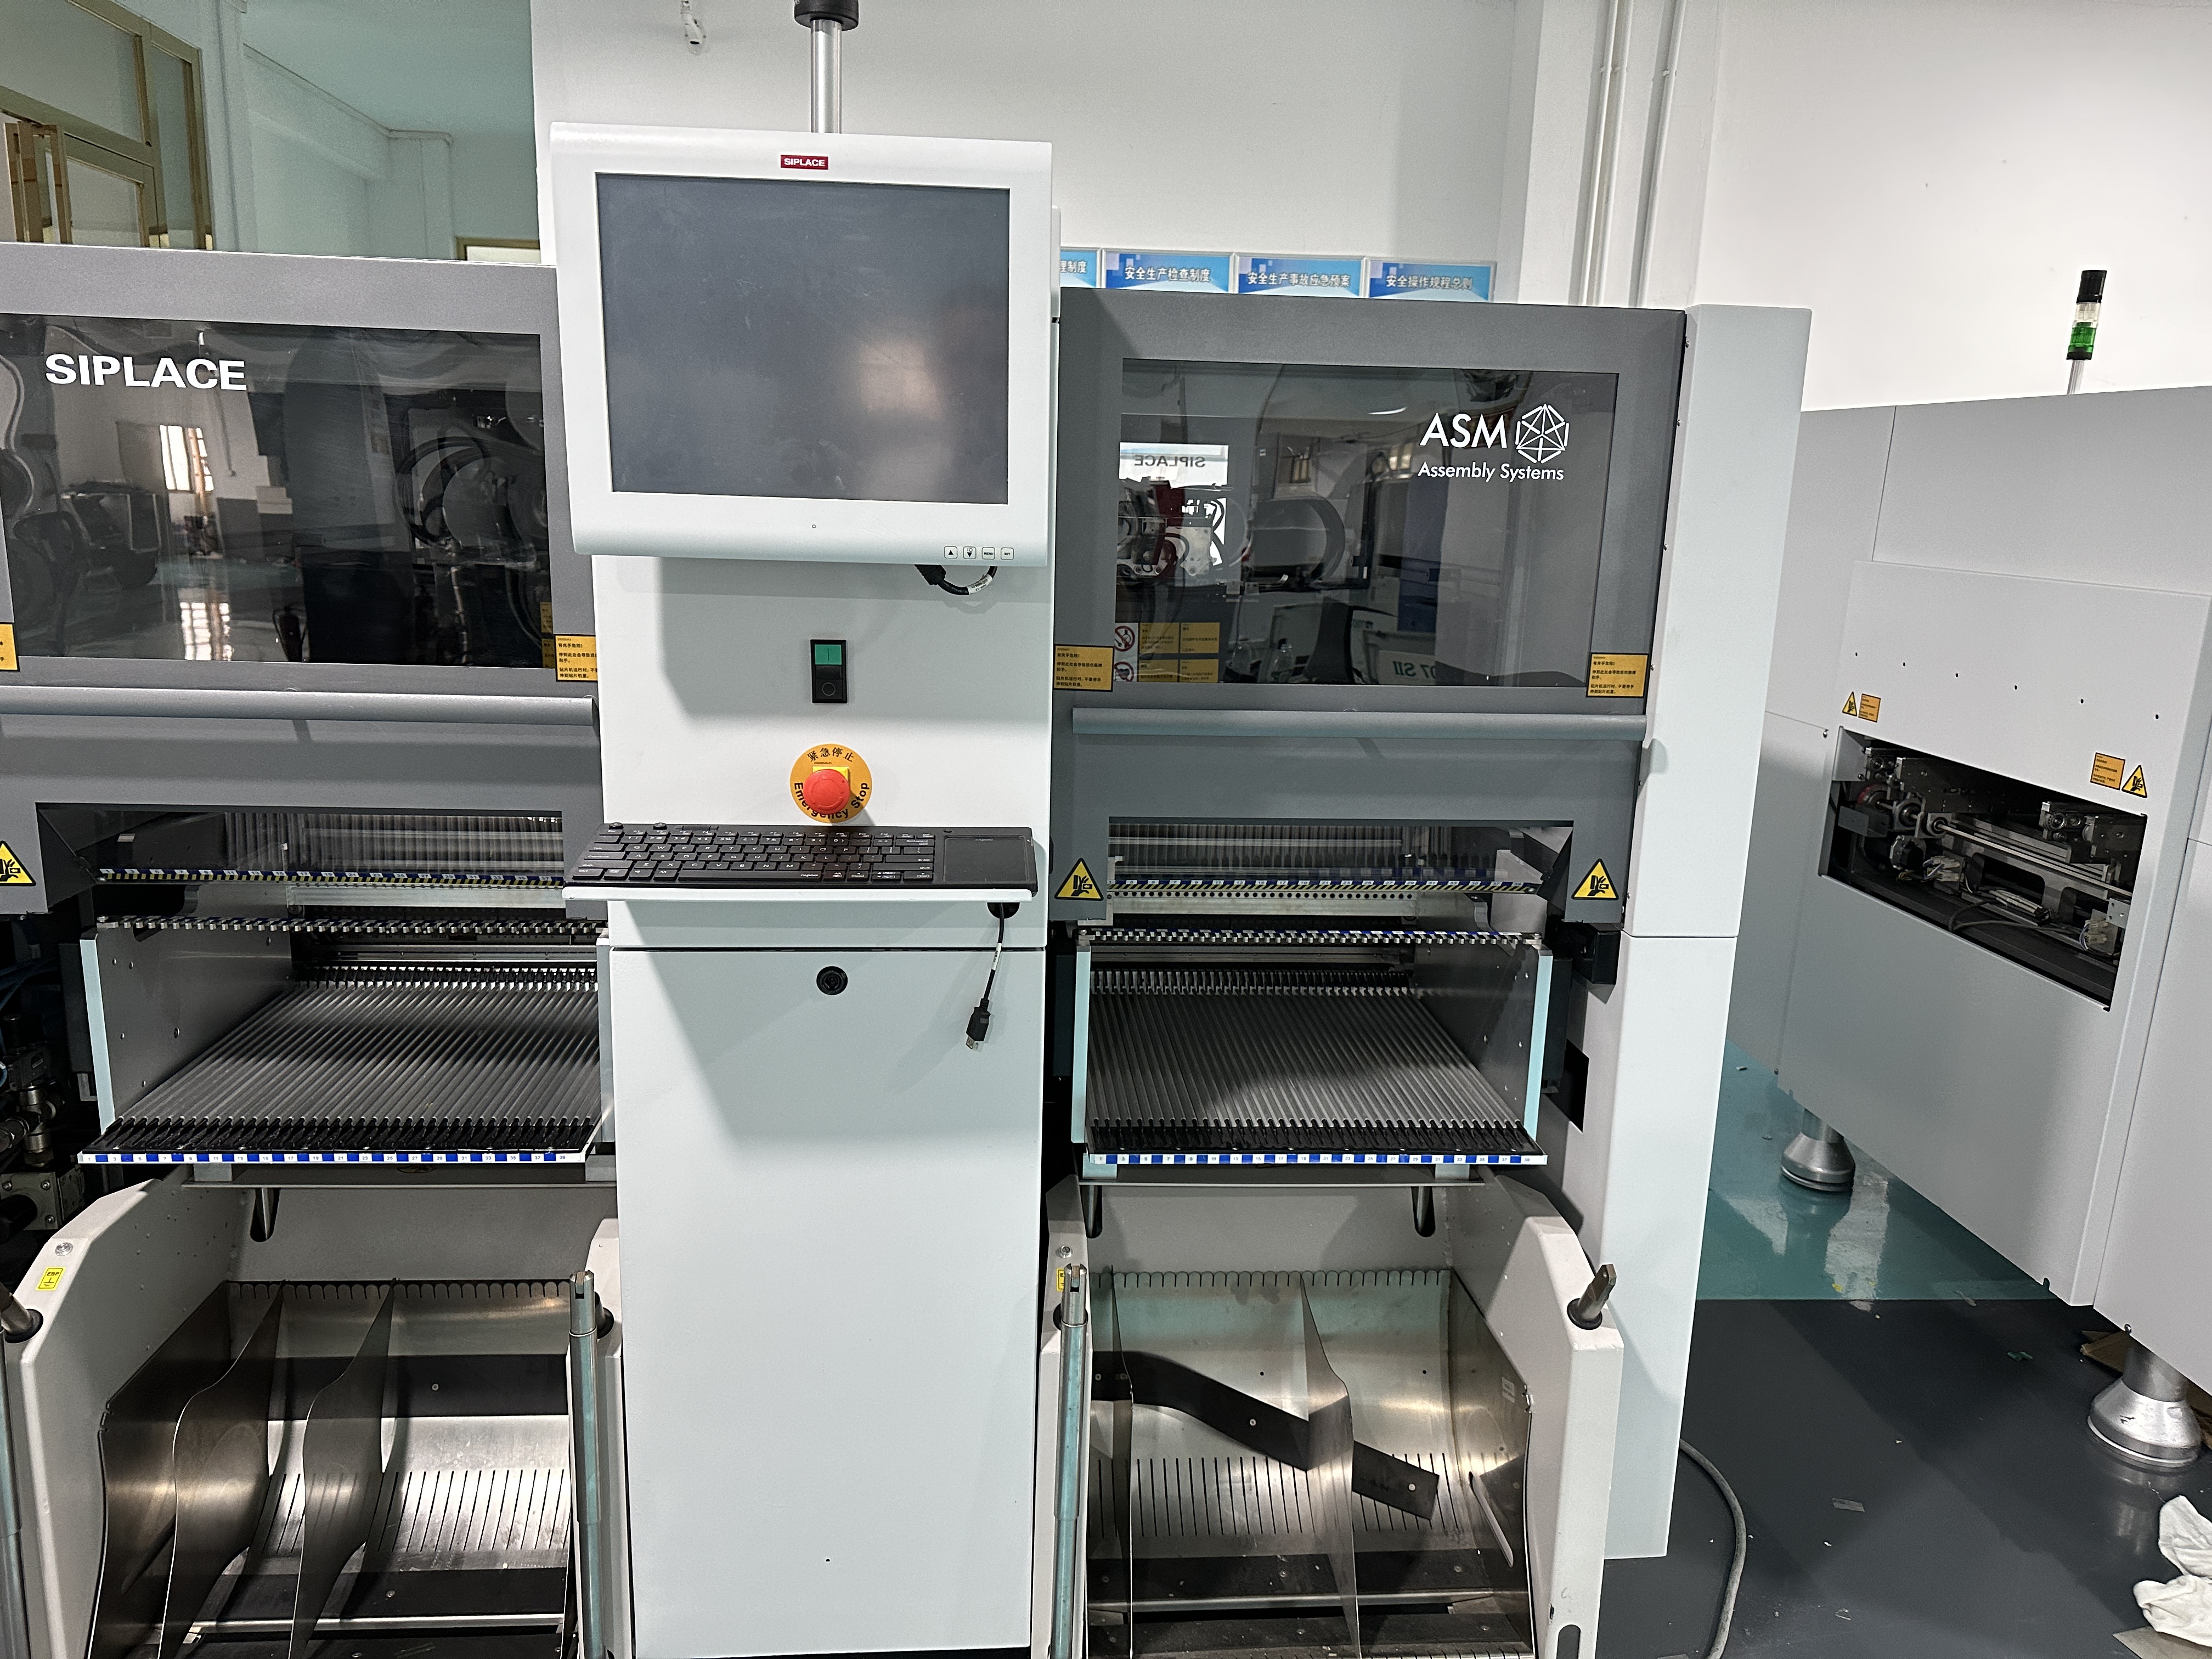 ASM placement machine-Siemens placement machine specifications and models SIPLACE X3S technical parameters